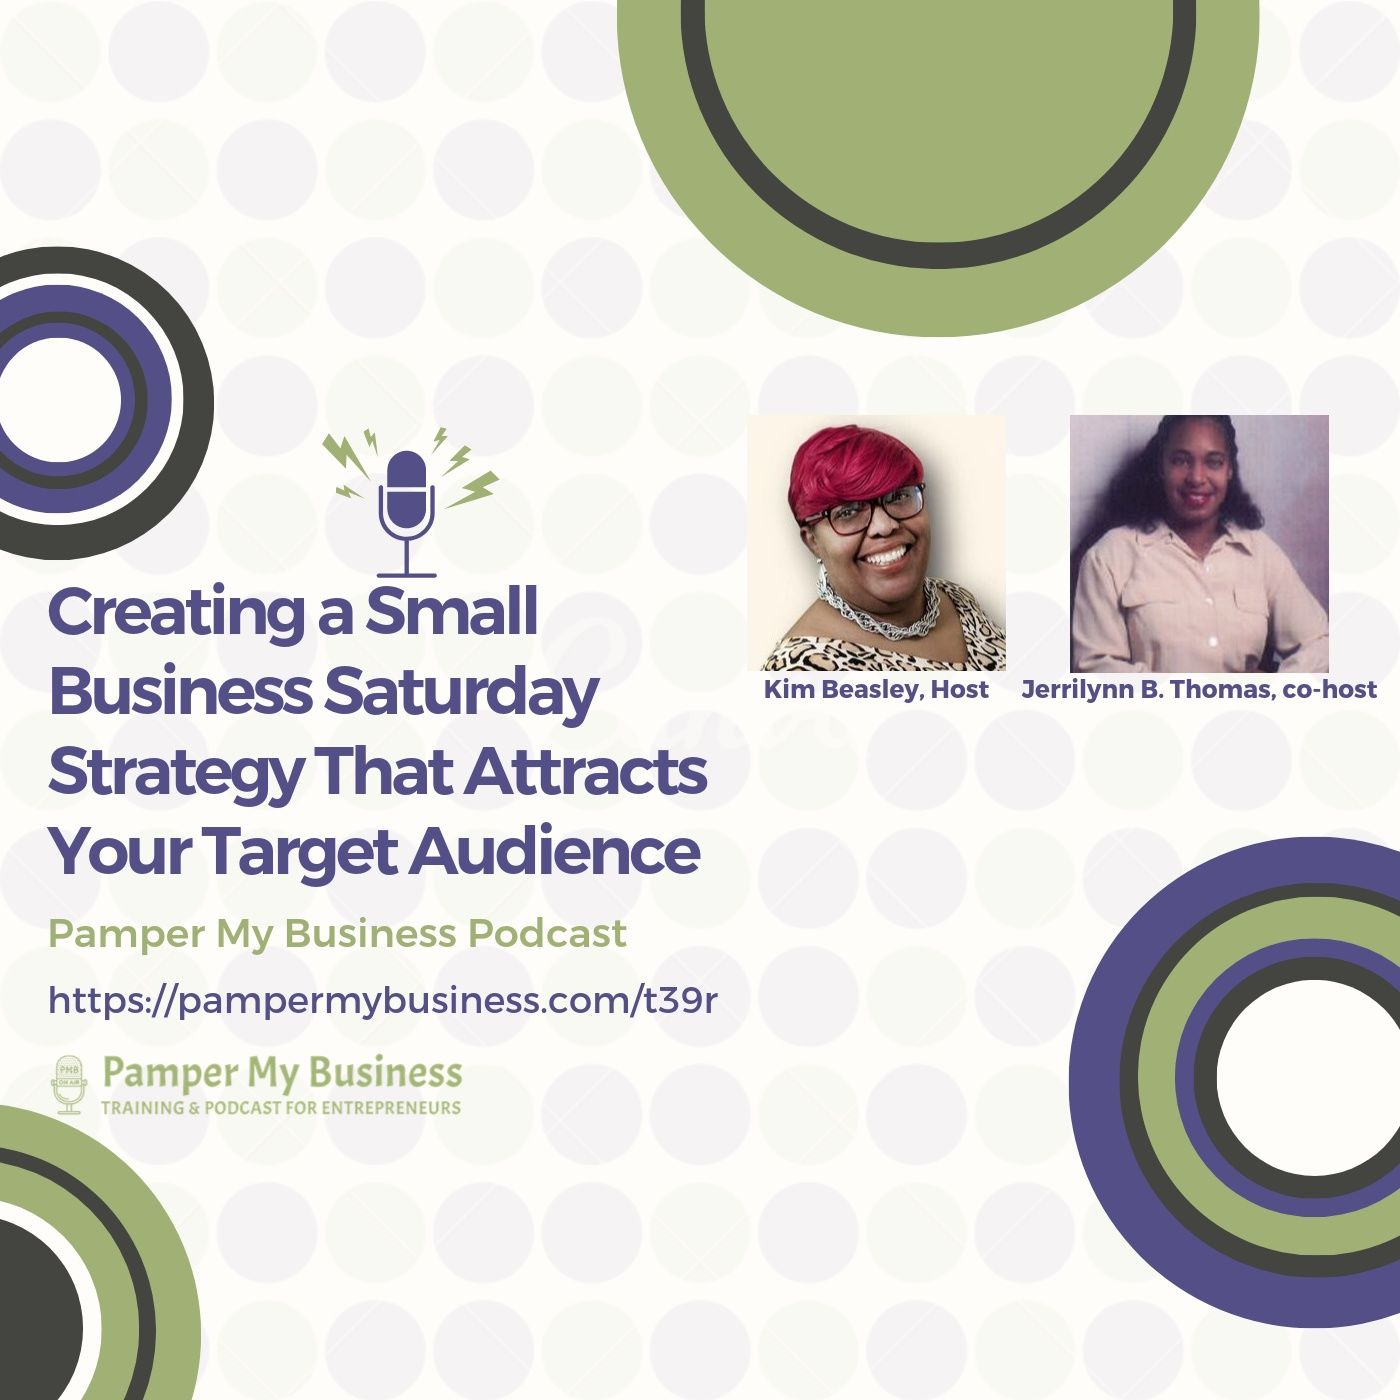 Creating a Small Business Saturday Strategy That Attracts Your Target Audience